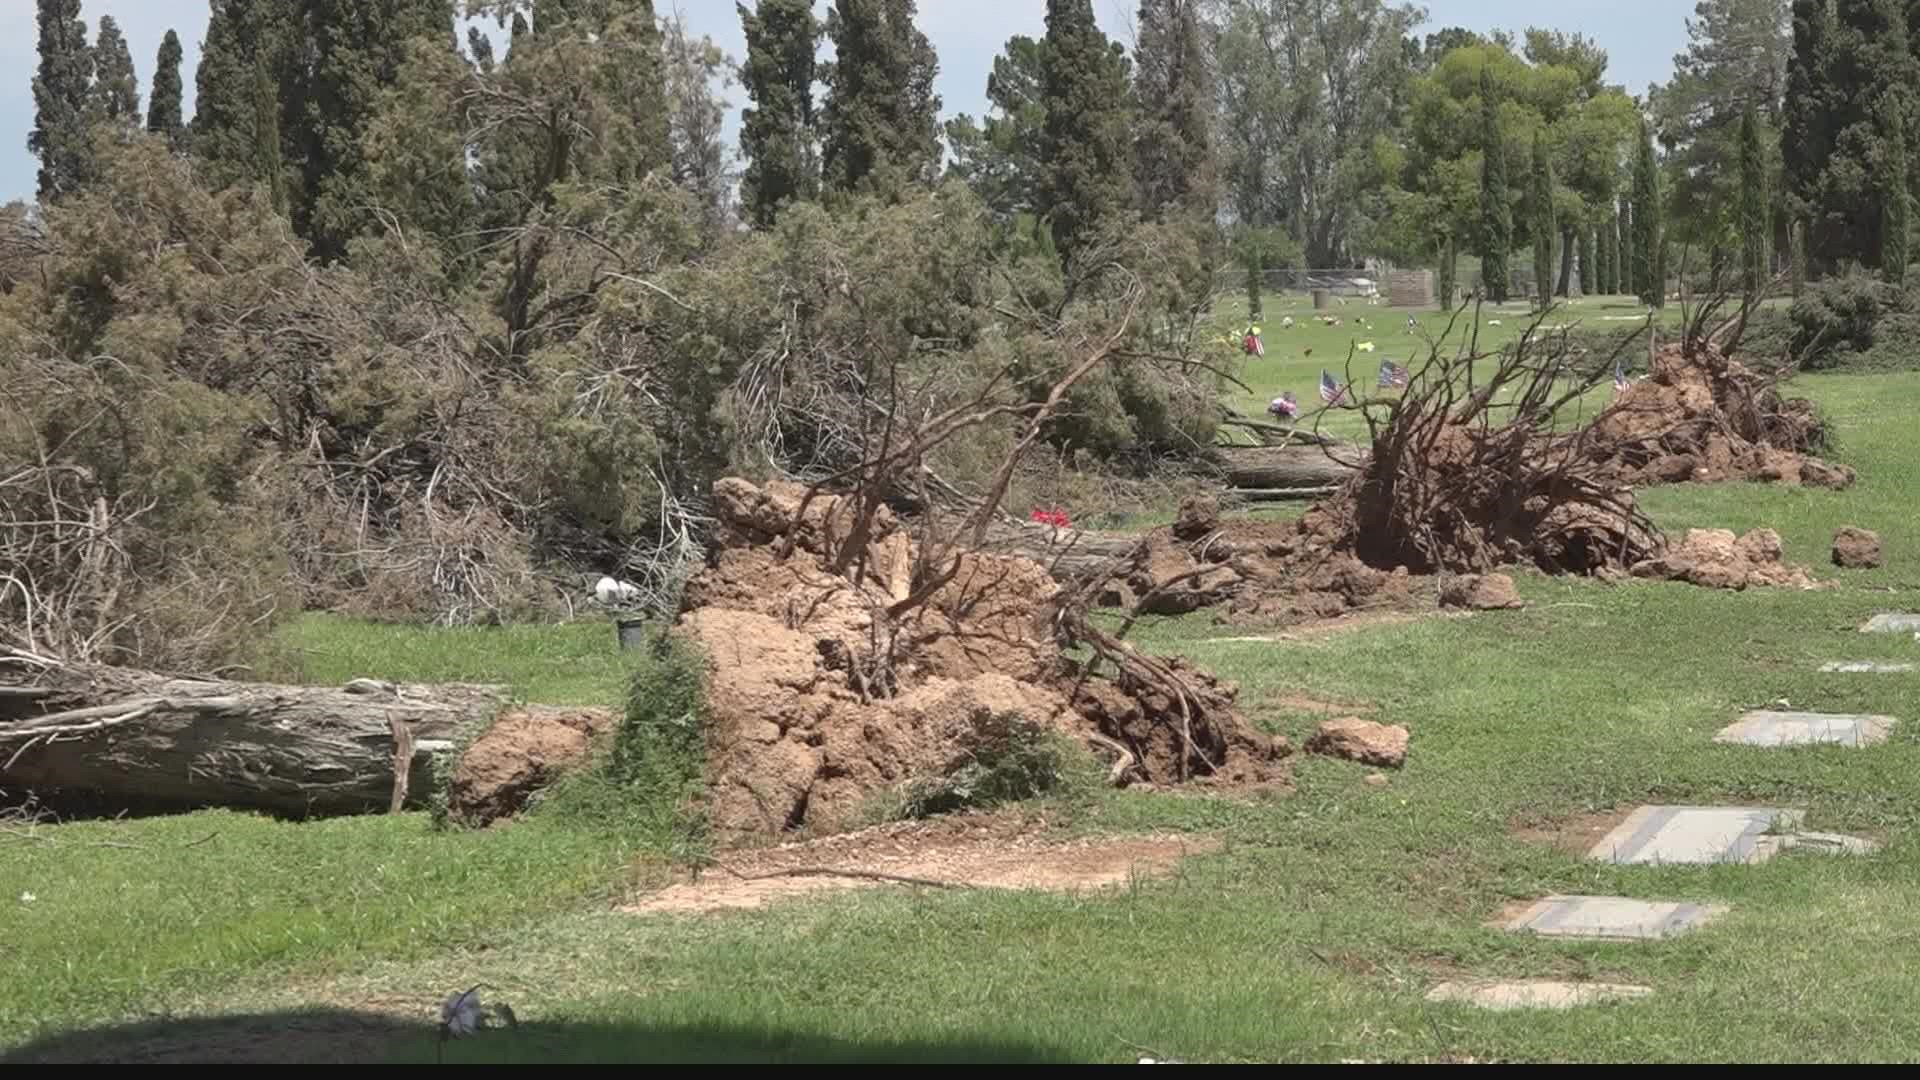 Crews are now cleaning up around the Mesa cemetery after monsoon storms ripped through the area this weekend. Colleen Sikora has the story.